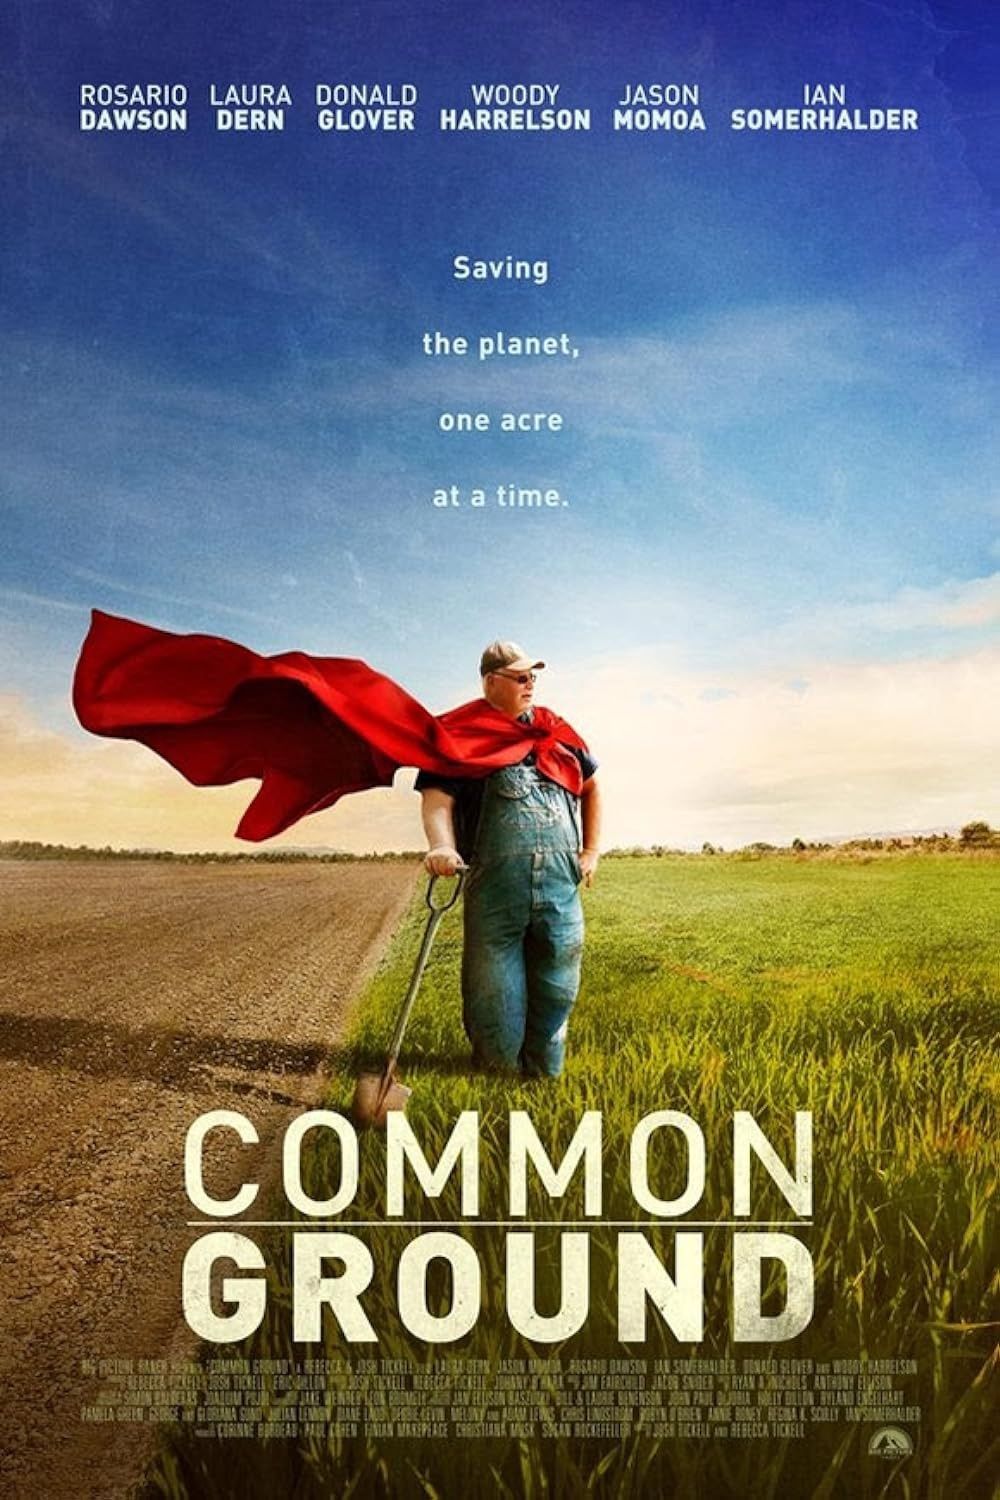 Common Ground film viewing - in person and free